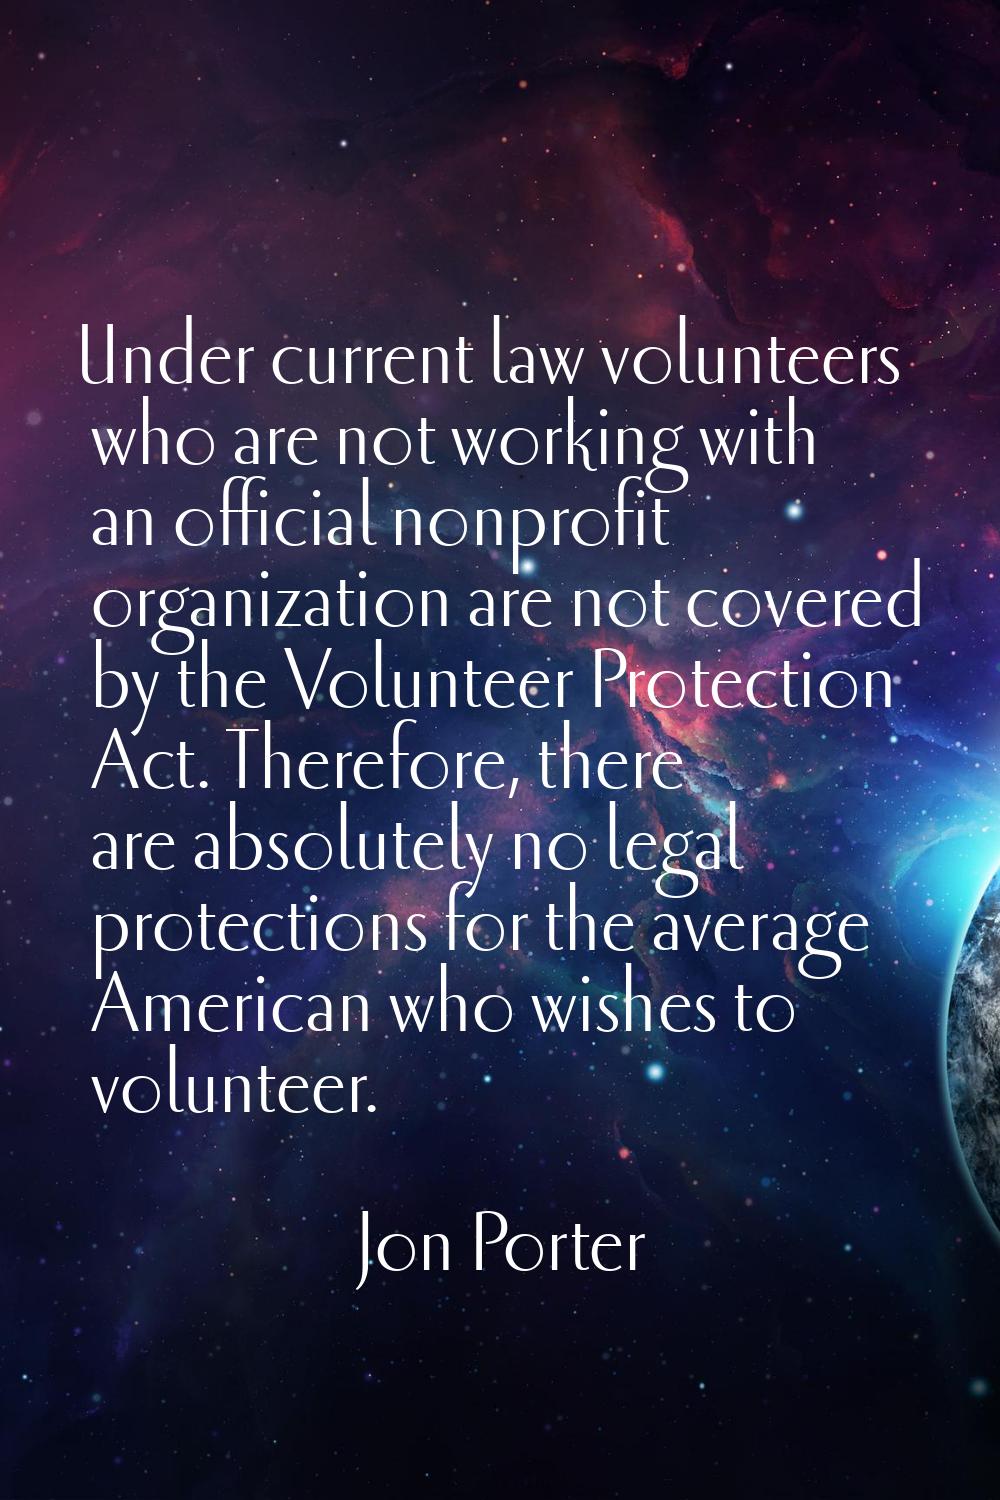 Under current law volunteers who are not working with an official nonprofit organization are not co